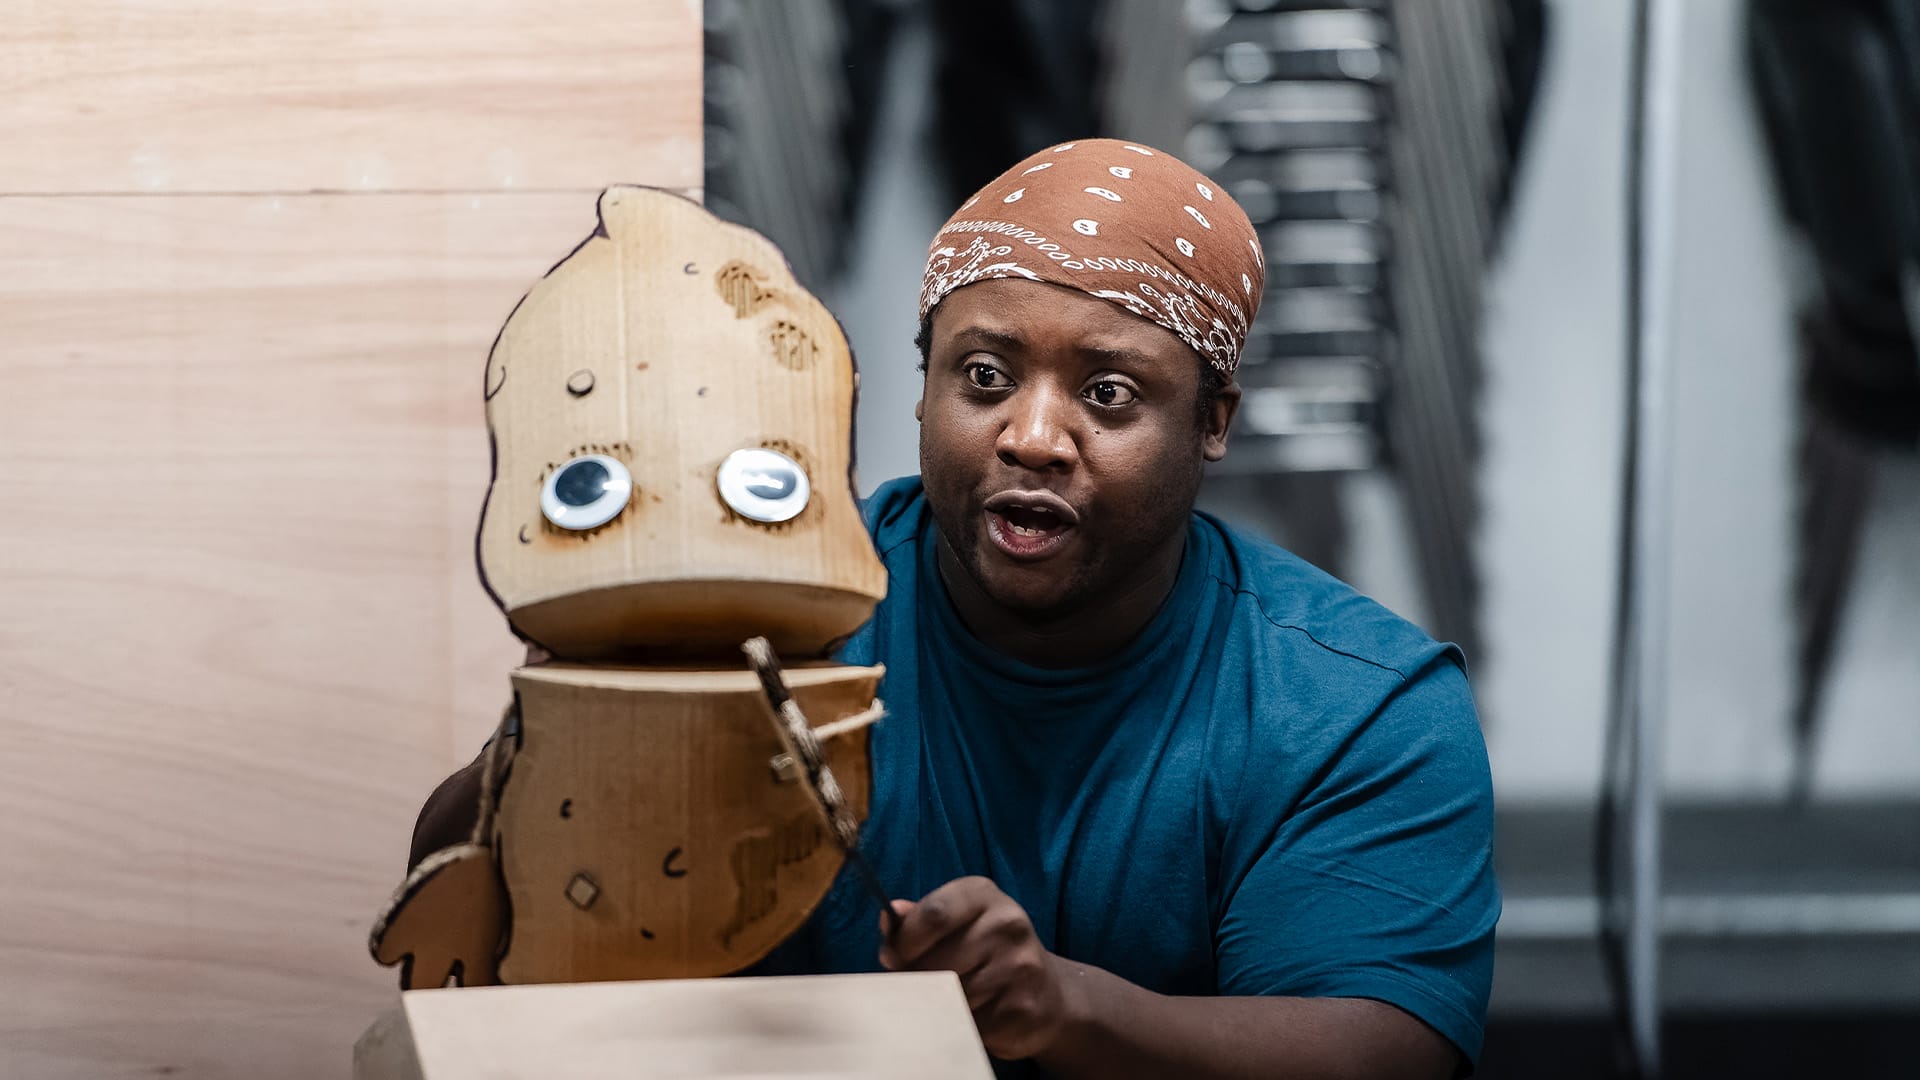 A performer holds a large cardboard puppet of a poo with large googly eyes.